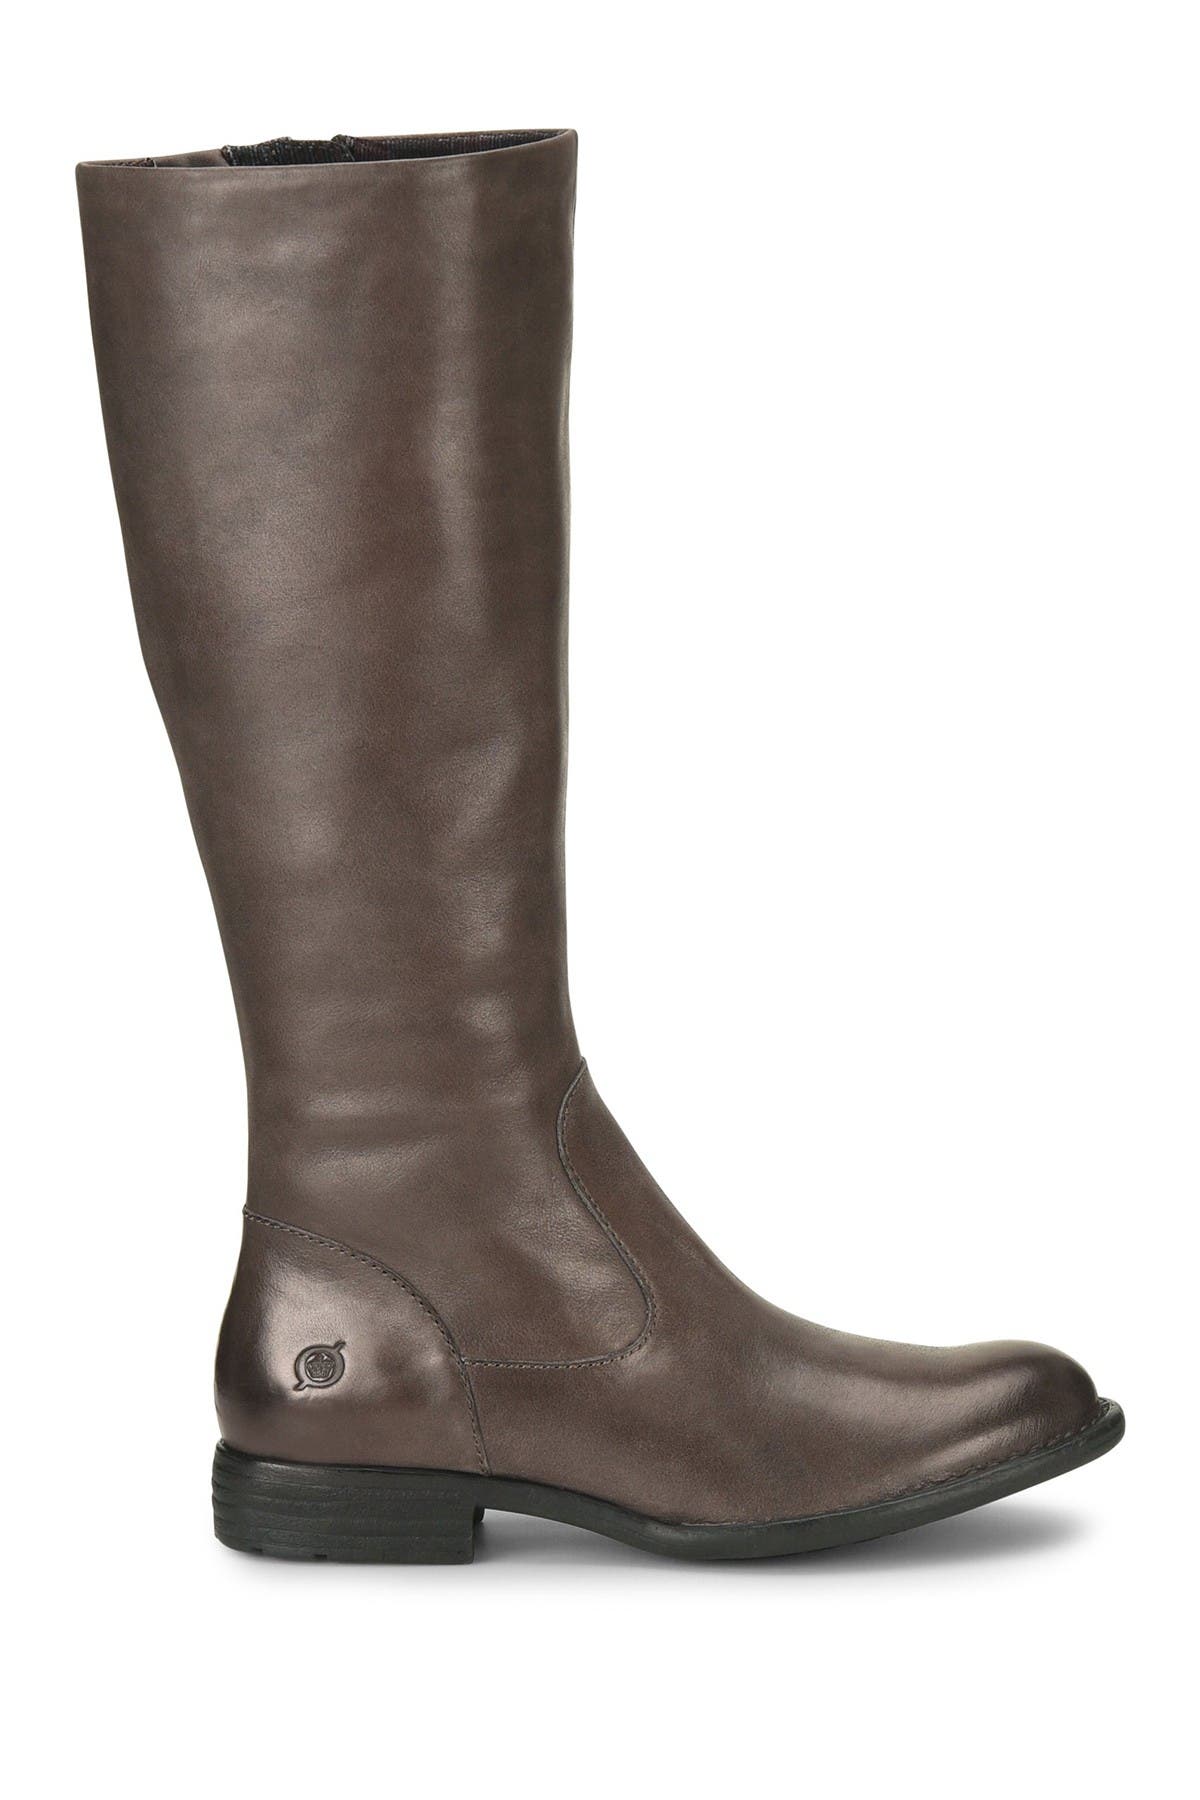 Details about   NEW BORN B.O.C SELSEY TAUPE TALL BOOTS WOMENS 10 SLEEK MINIMALIST BOOTS Z59417